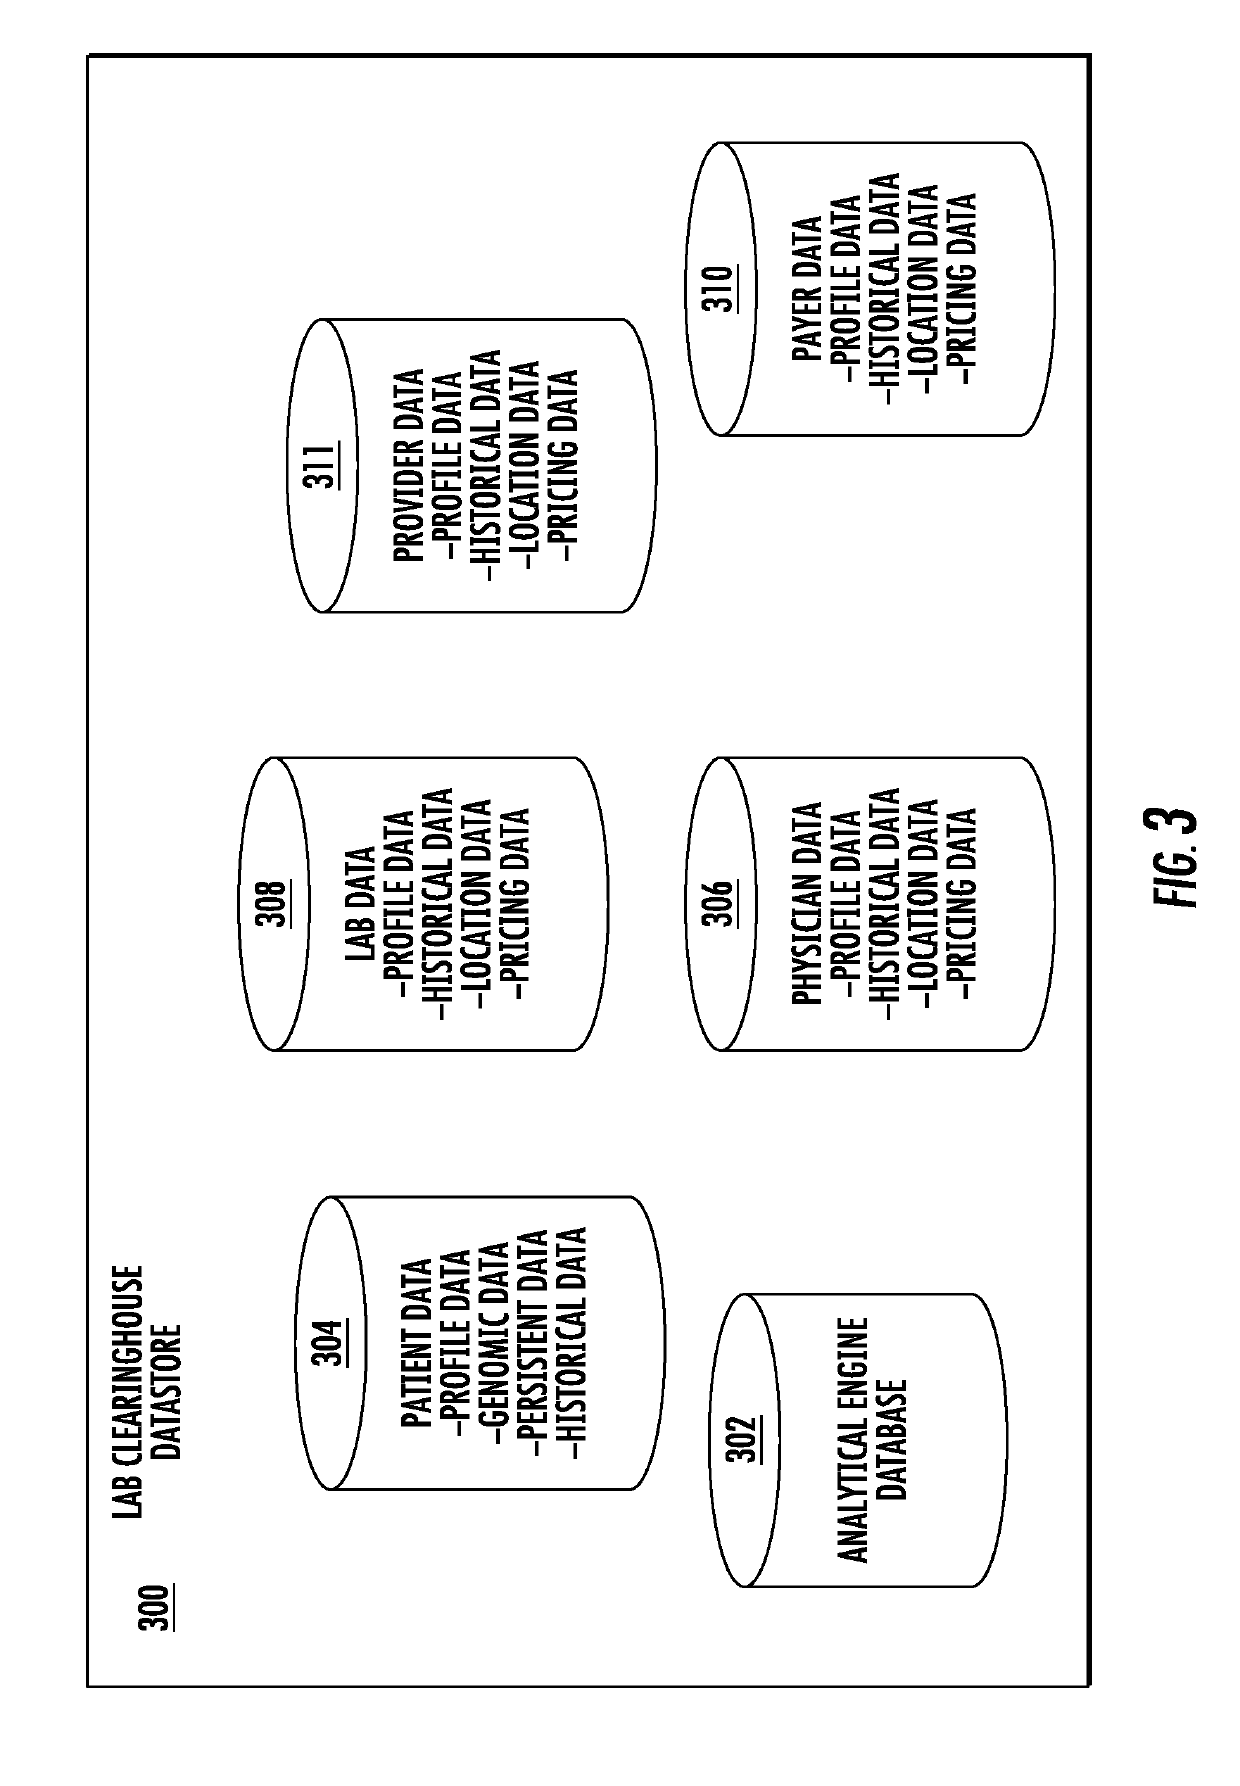 Device for approving medical tests across a plurality of medical laboratories, medical providers, and lab payers and methods for using the same